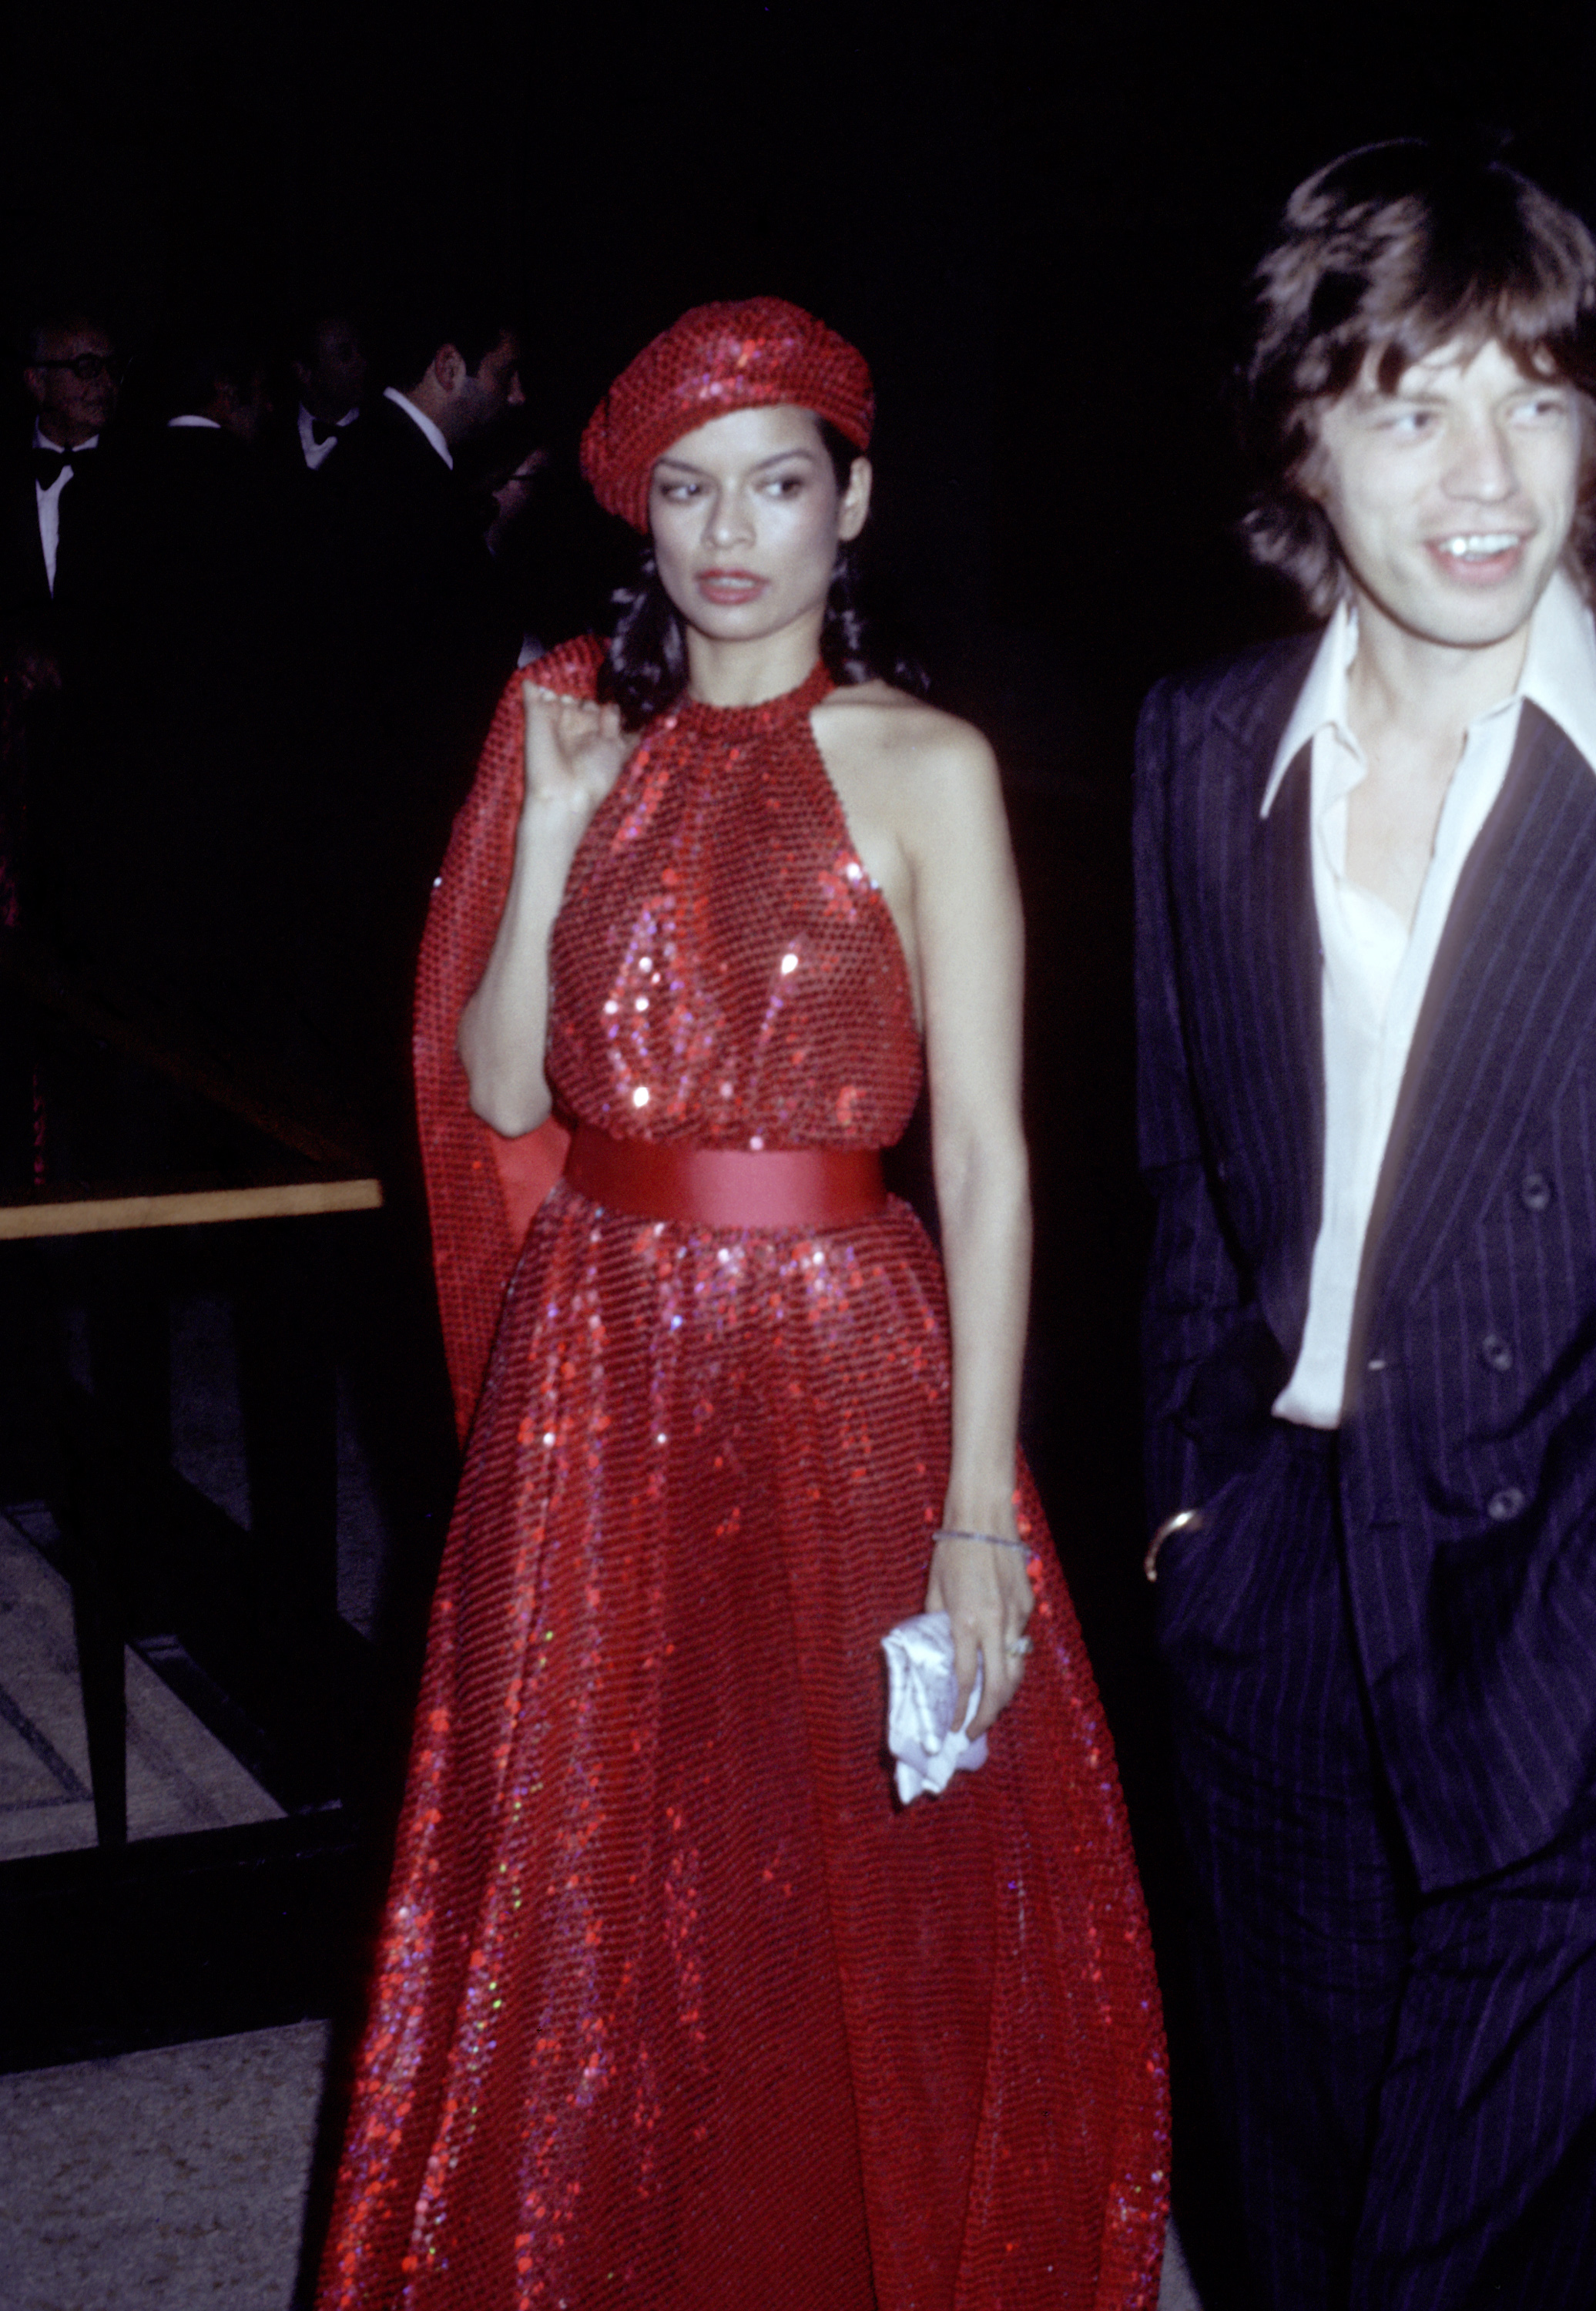 Iconic Party Looks: Bianca Jagger in a sequin dress